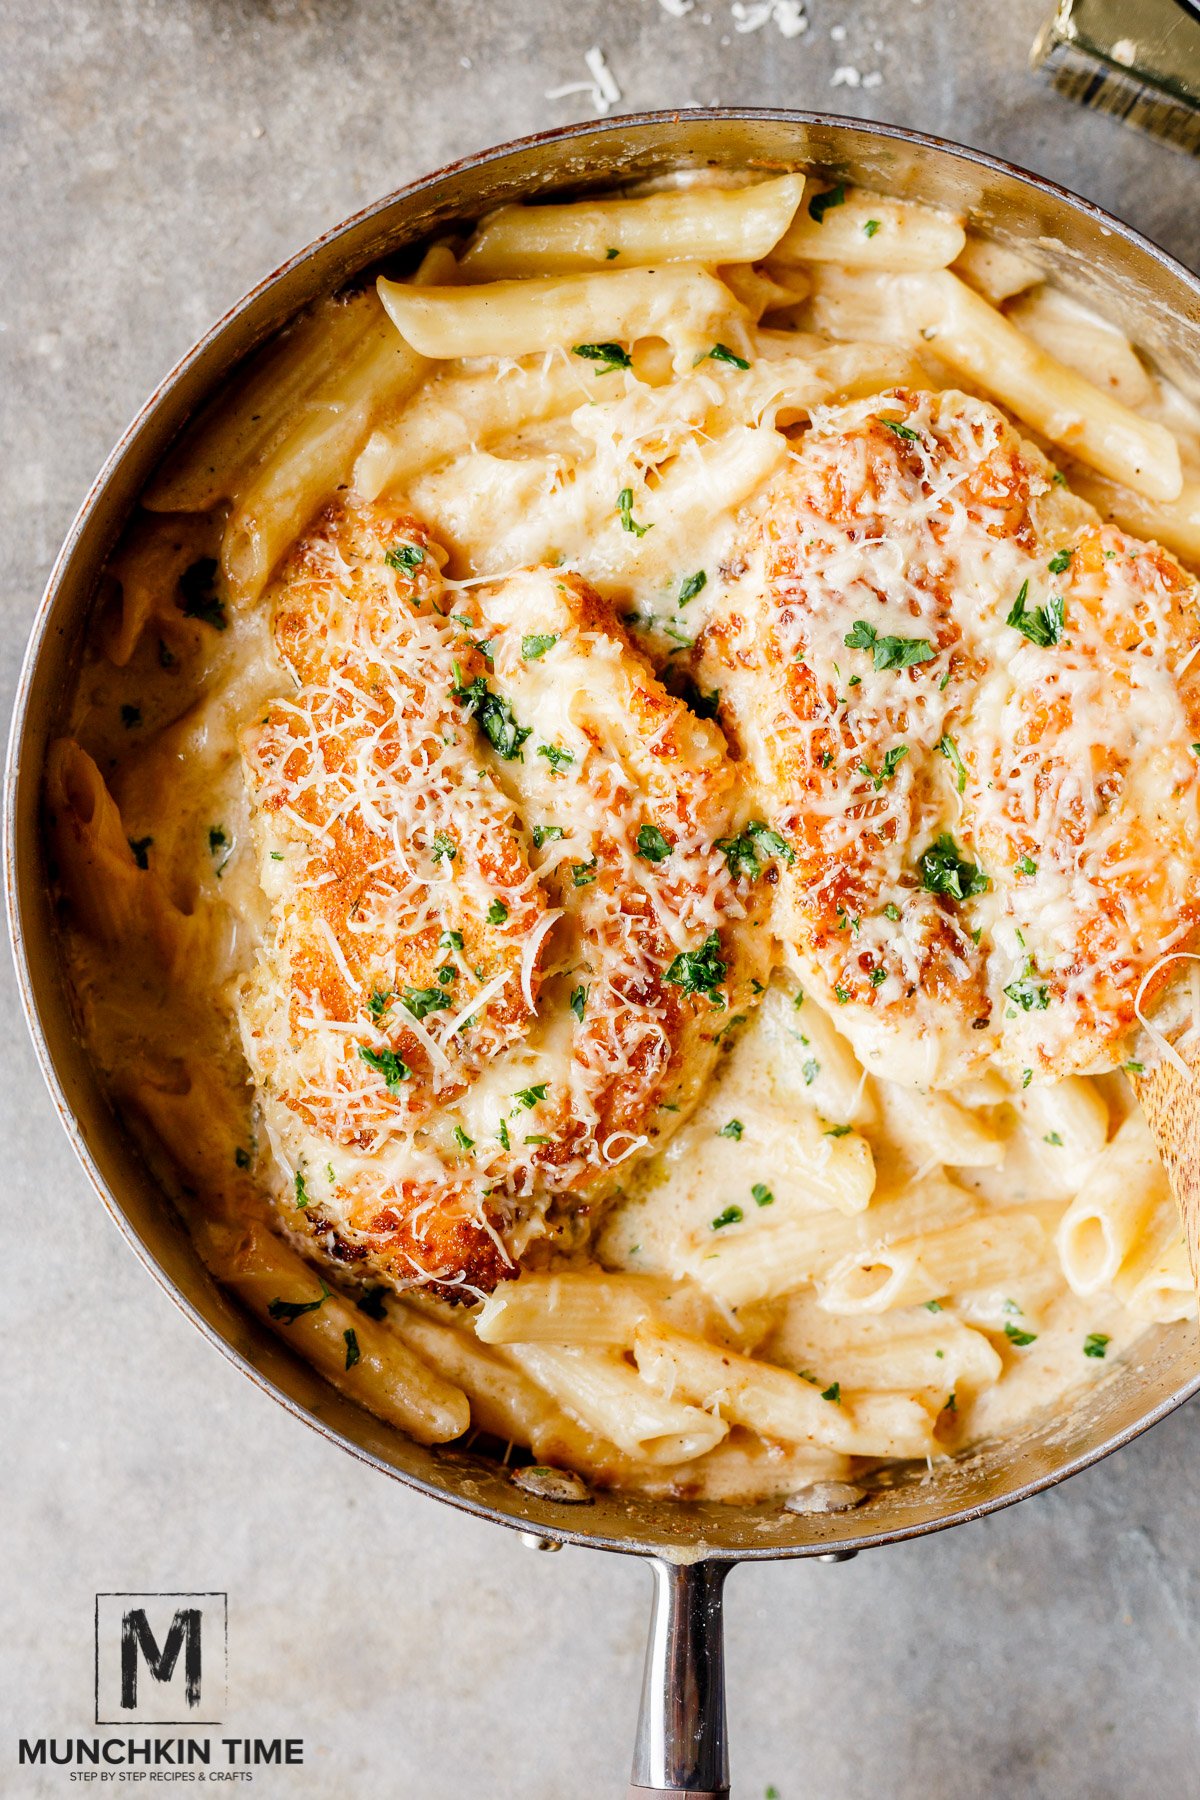 Easy Oven Baked Chicken Pasta in Buttery White Sauce (Video) - Munchkin Time